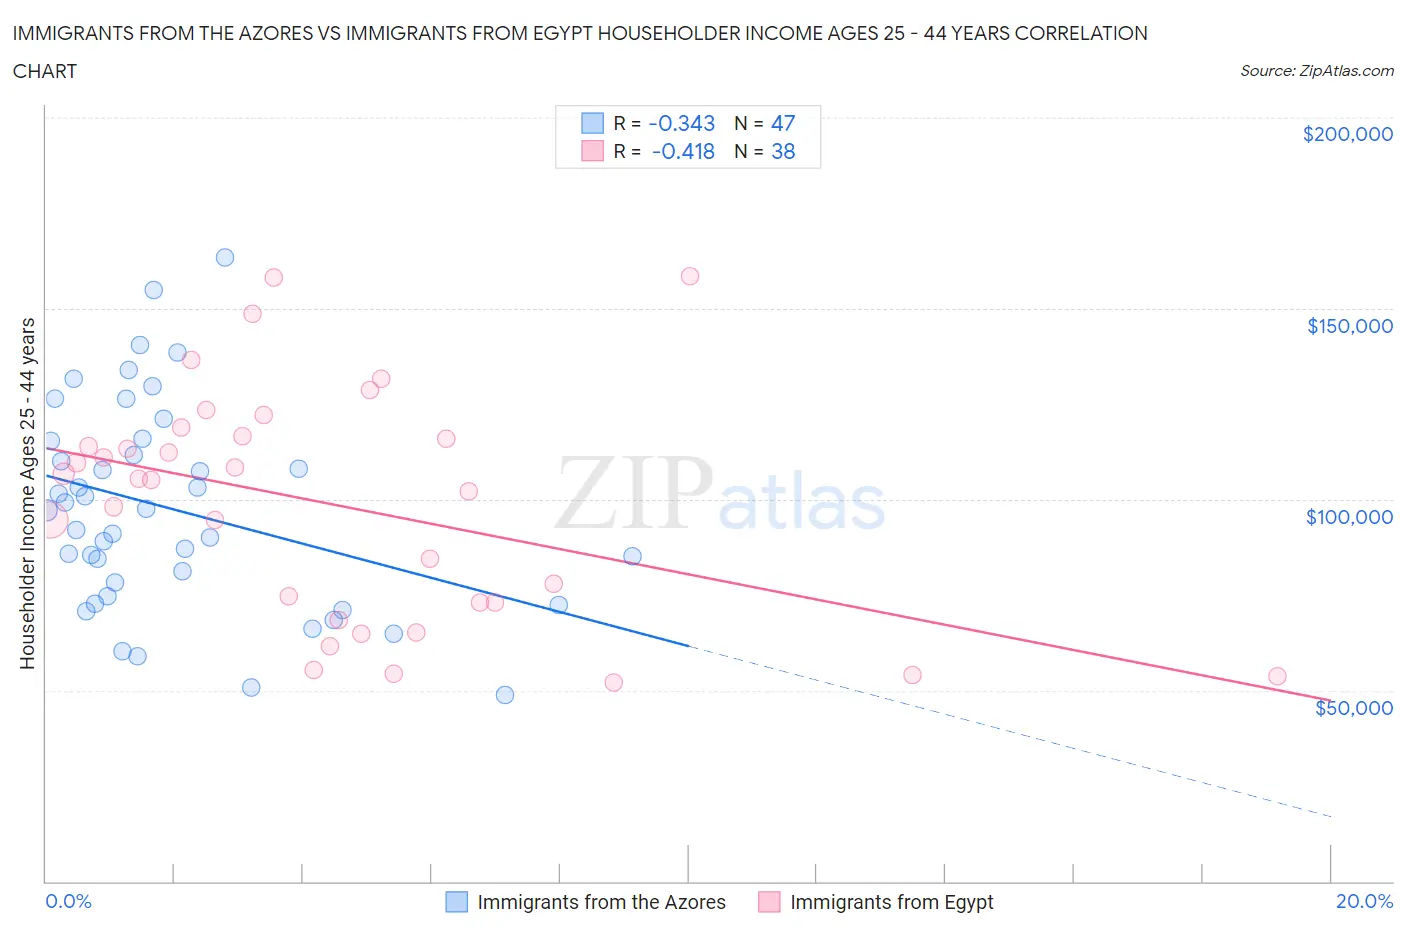 Immigrants from the Azores vs Immigrants from Egypt Householder Income Ages 25 - 44 years